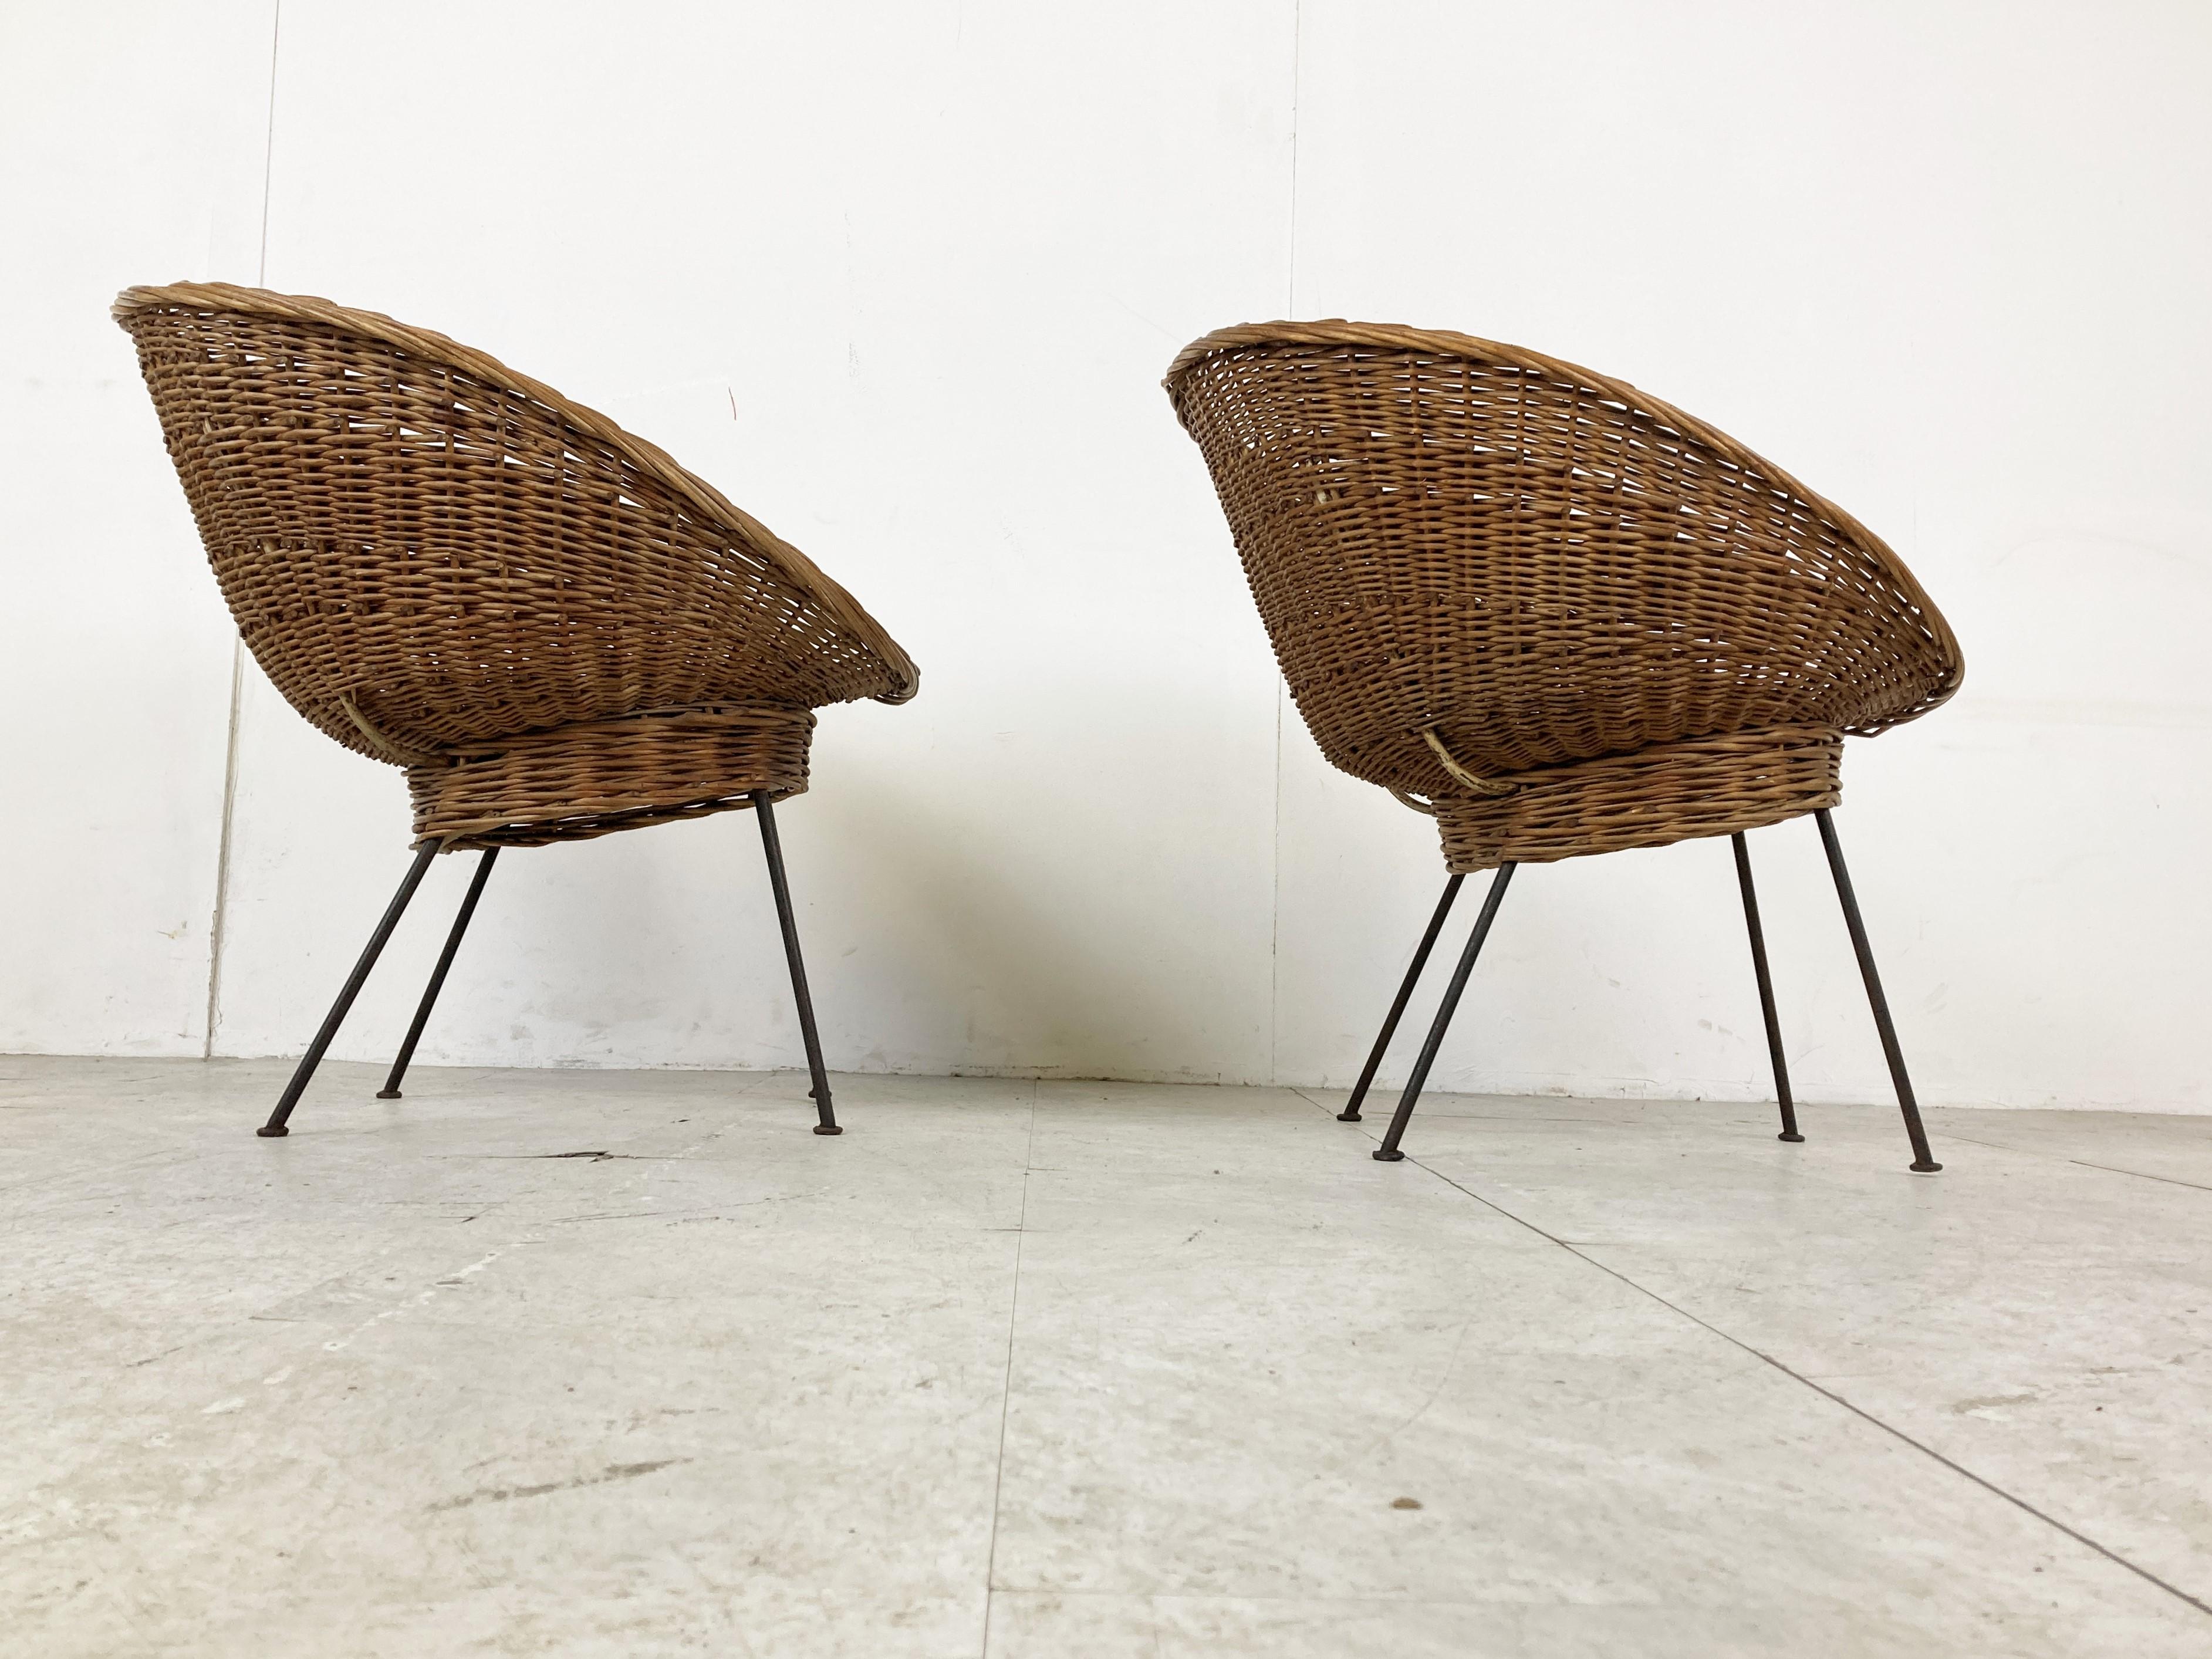 Vintage Italian Wicker Lounge Chairs, Set of 2, 1960s For Sale 3